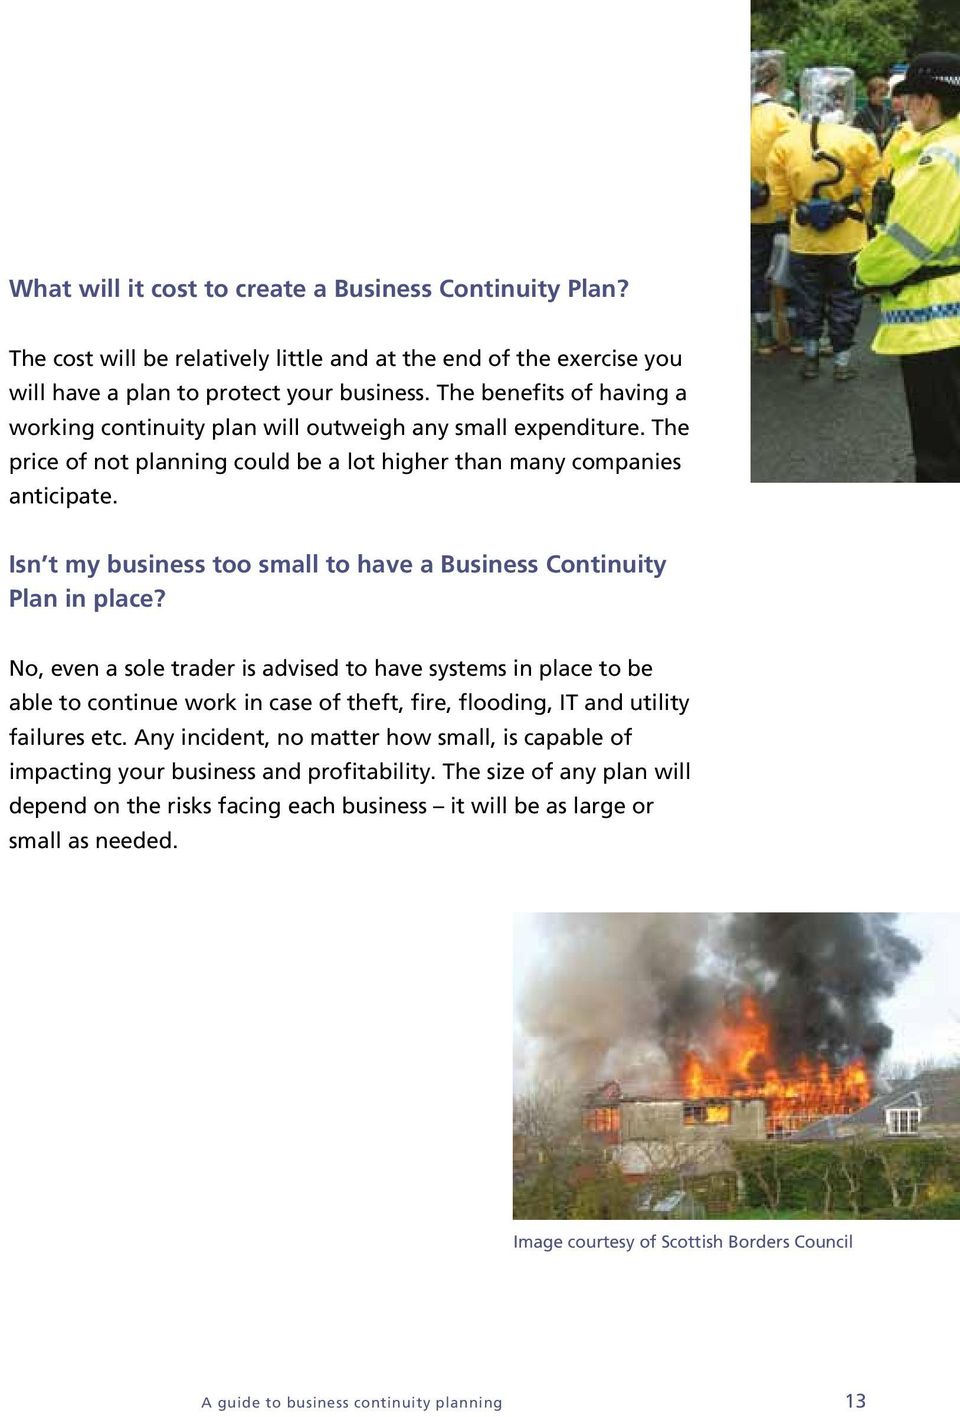 Isn t my business too small to have a Business Continuity Plan in place?